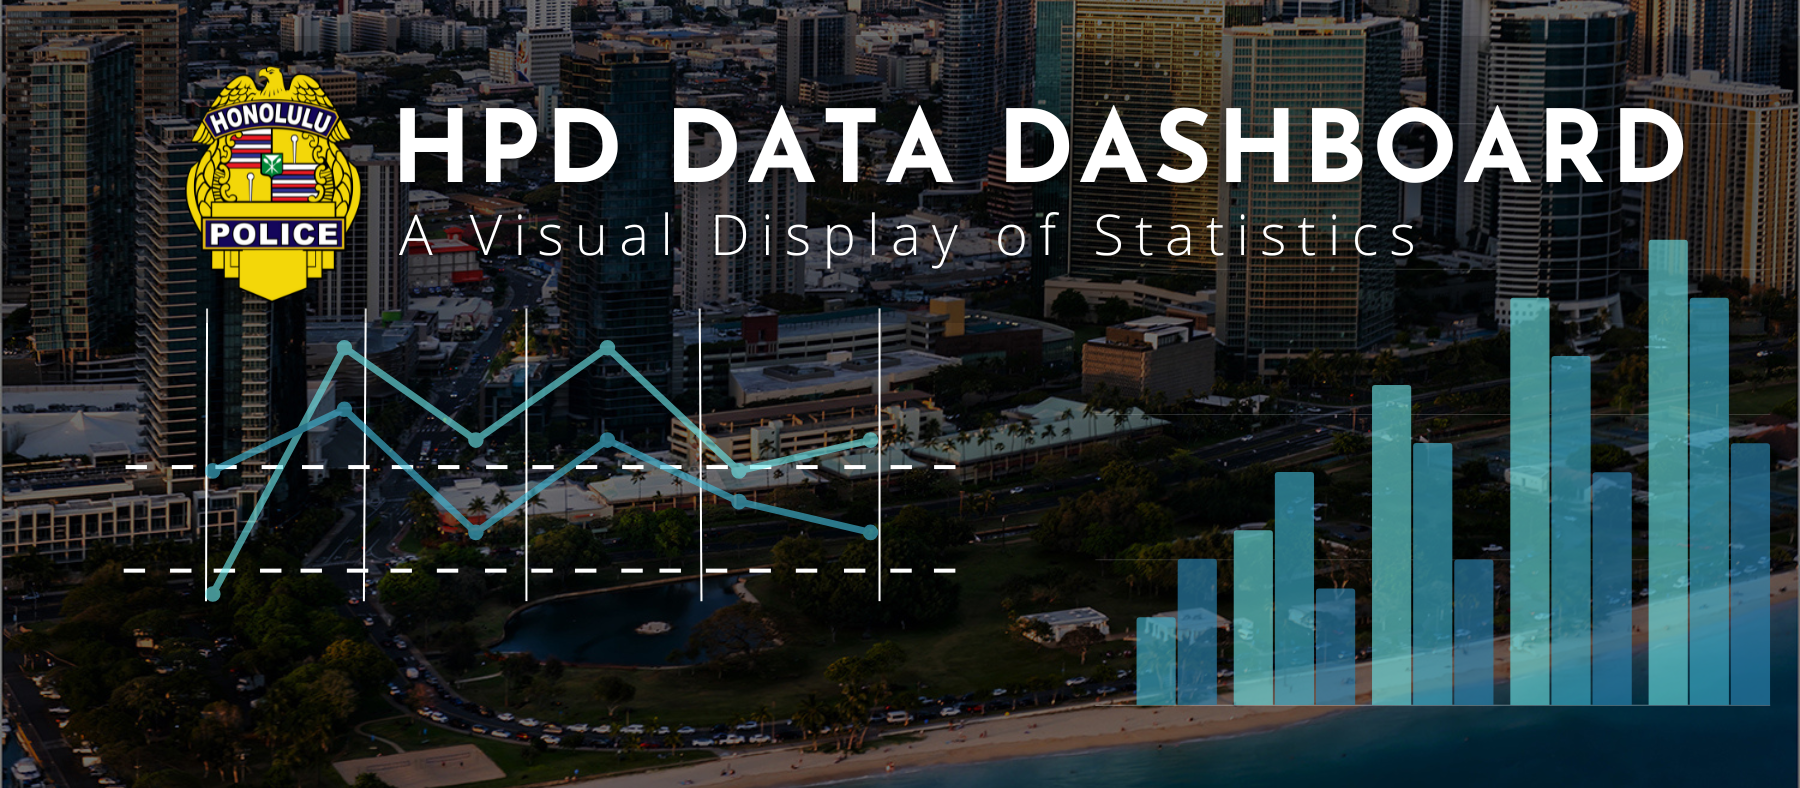 Introducing the HPD Data Dashboard! Access department data on crime, clearance rates, motor vehicle collisions, and crime mapping with a brand-new visual display of statistics. Our Data Dashboard provides transparency and accountability to the public we serve.